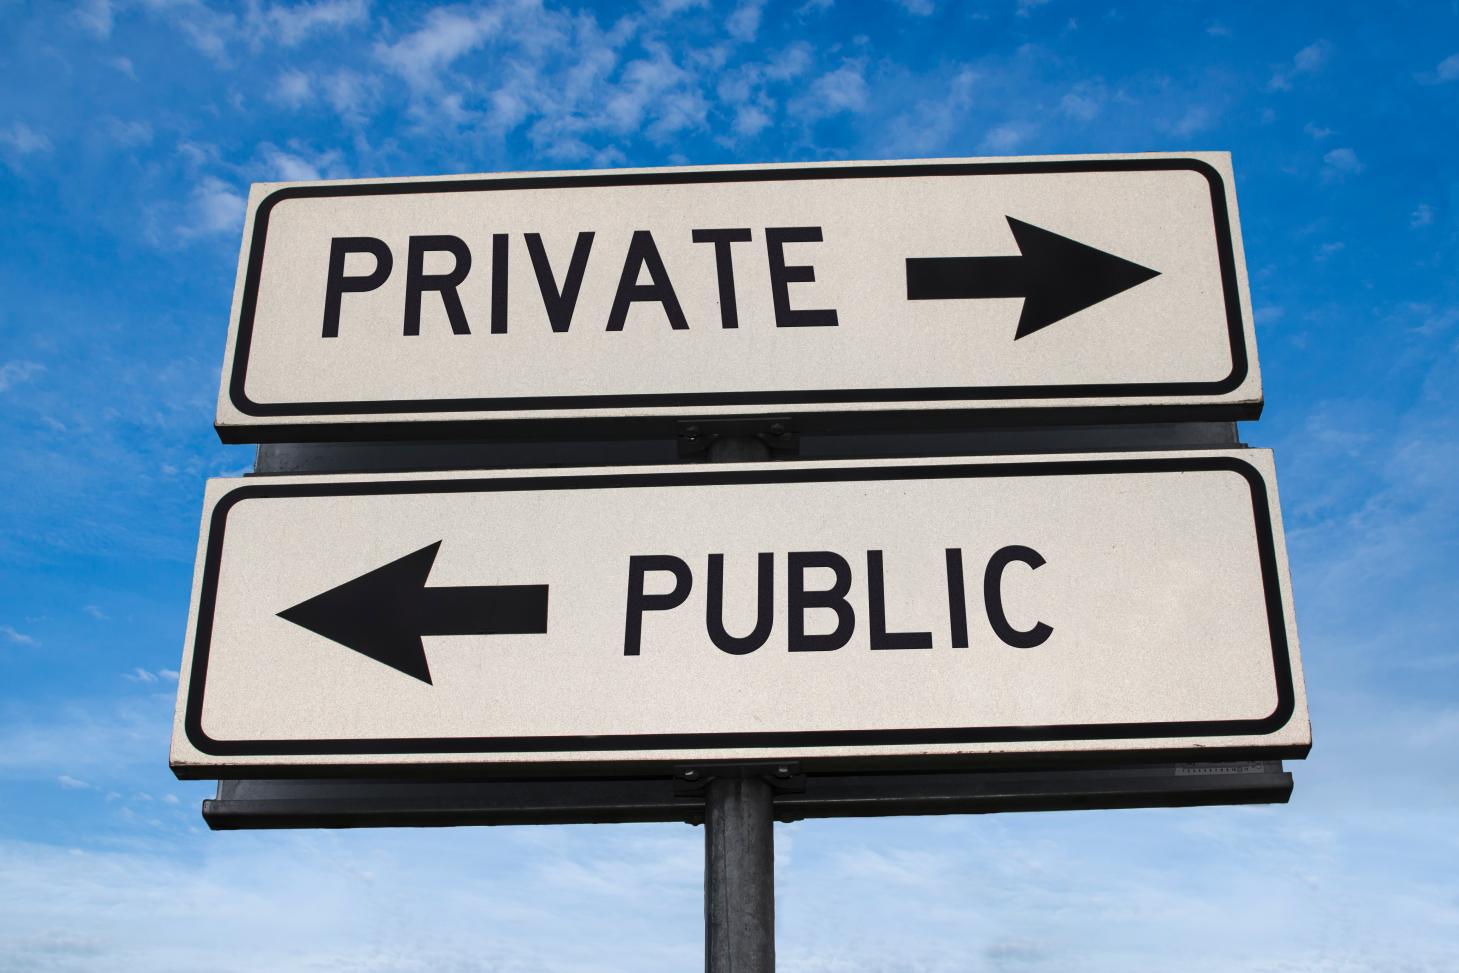 Image of a sign with words public and private and arrows pointing in opposite directions